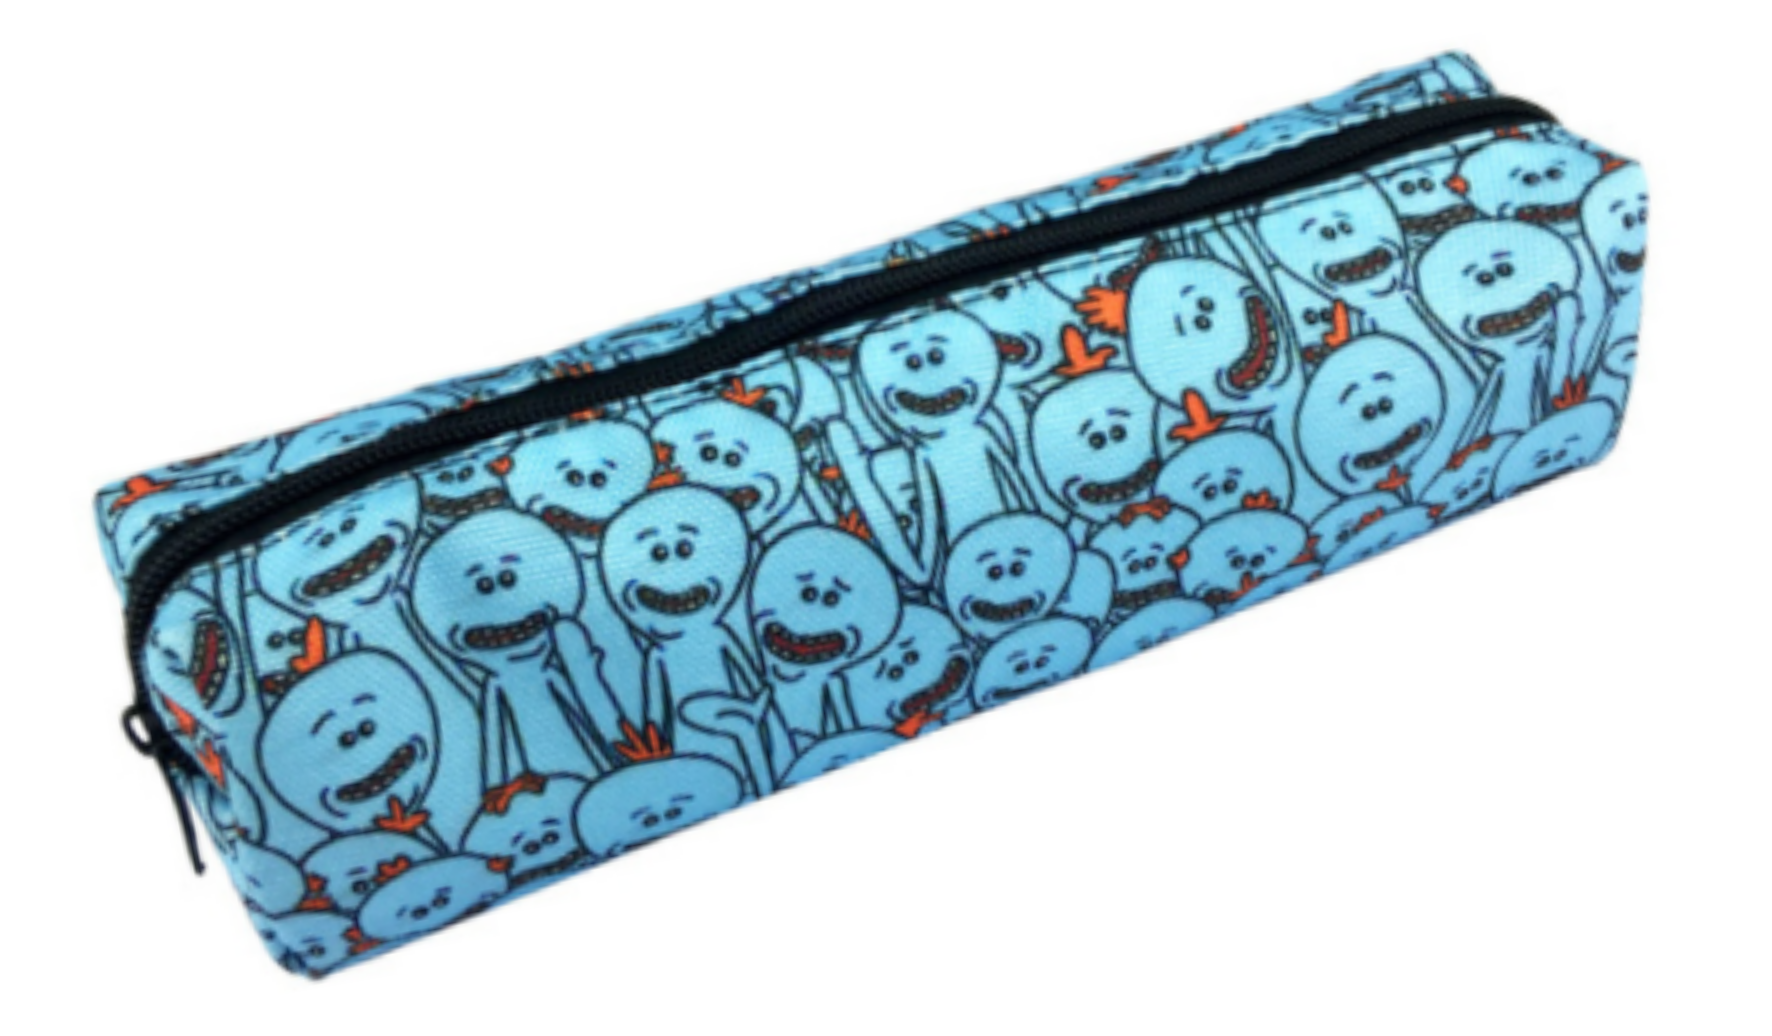 Rick And Morty - Pencil Case (1772x1036)